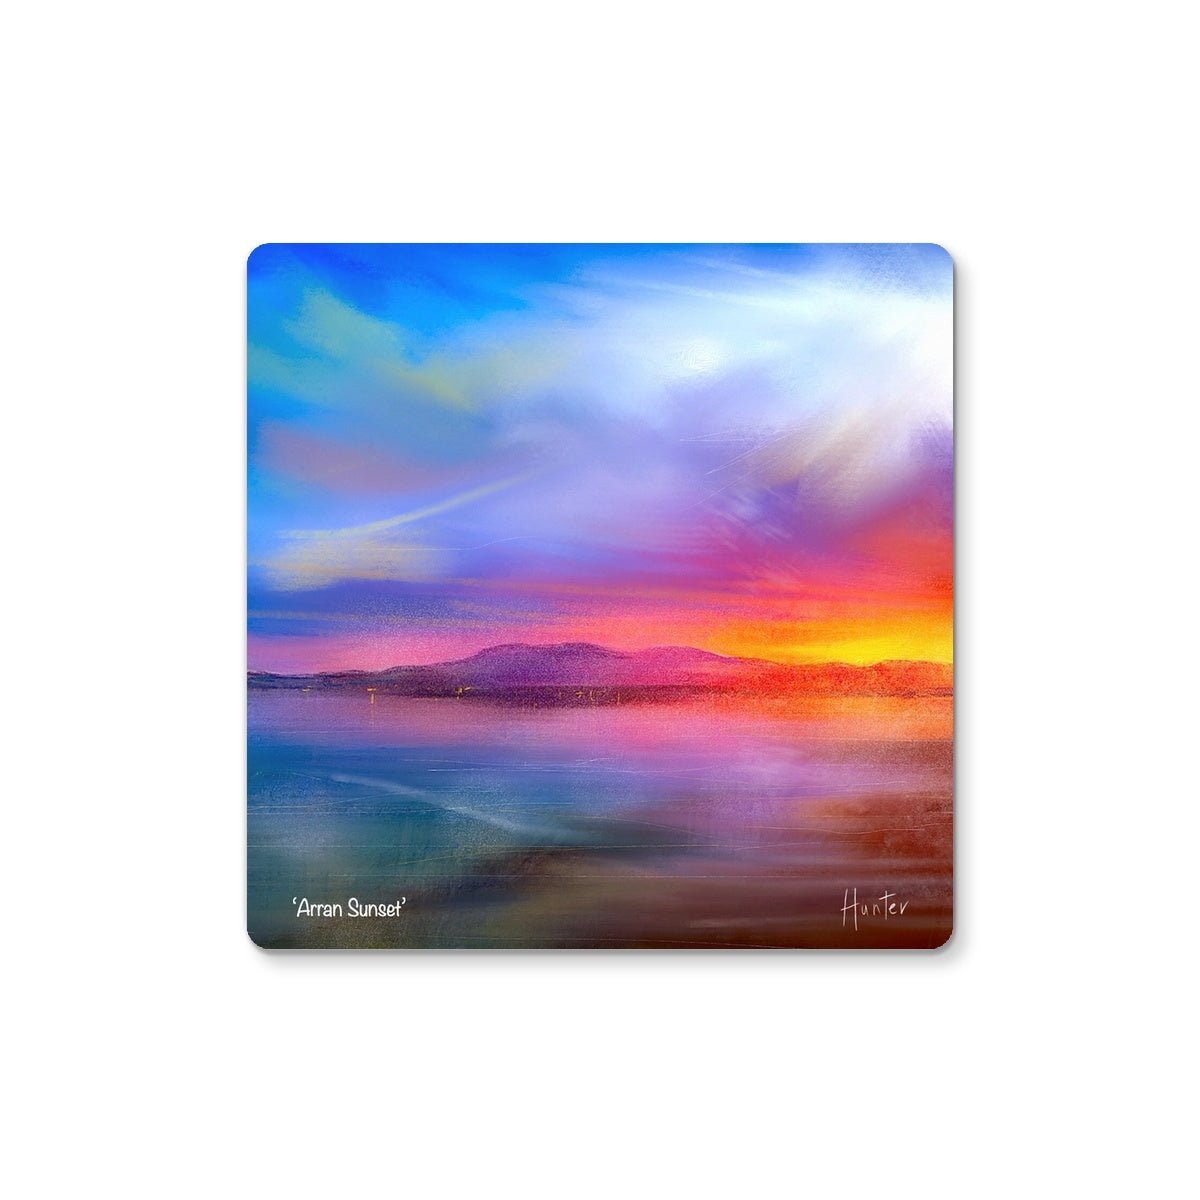 Arran Sunset Art Gifts Coaster-Coasters-Arran Art Gallery-Single Coaster-Paintings, Prints, Homeware, Art Gifts From Scotland By Scottish Artist Kevin Hunter